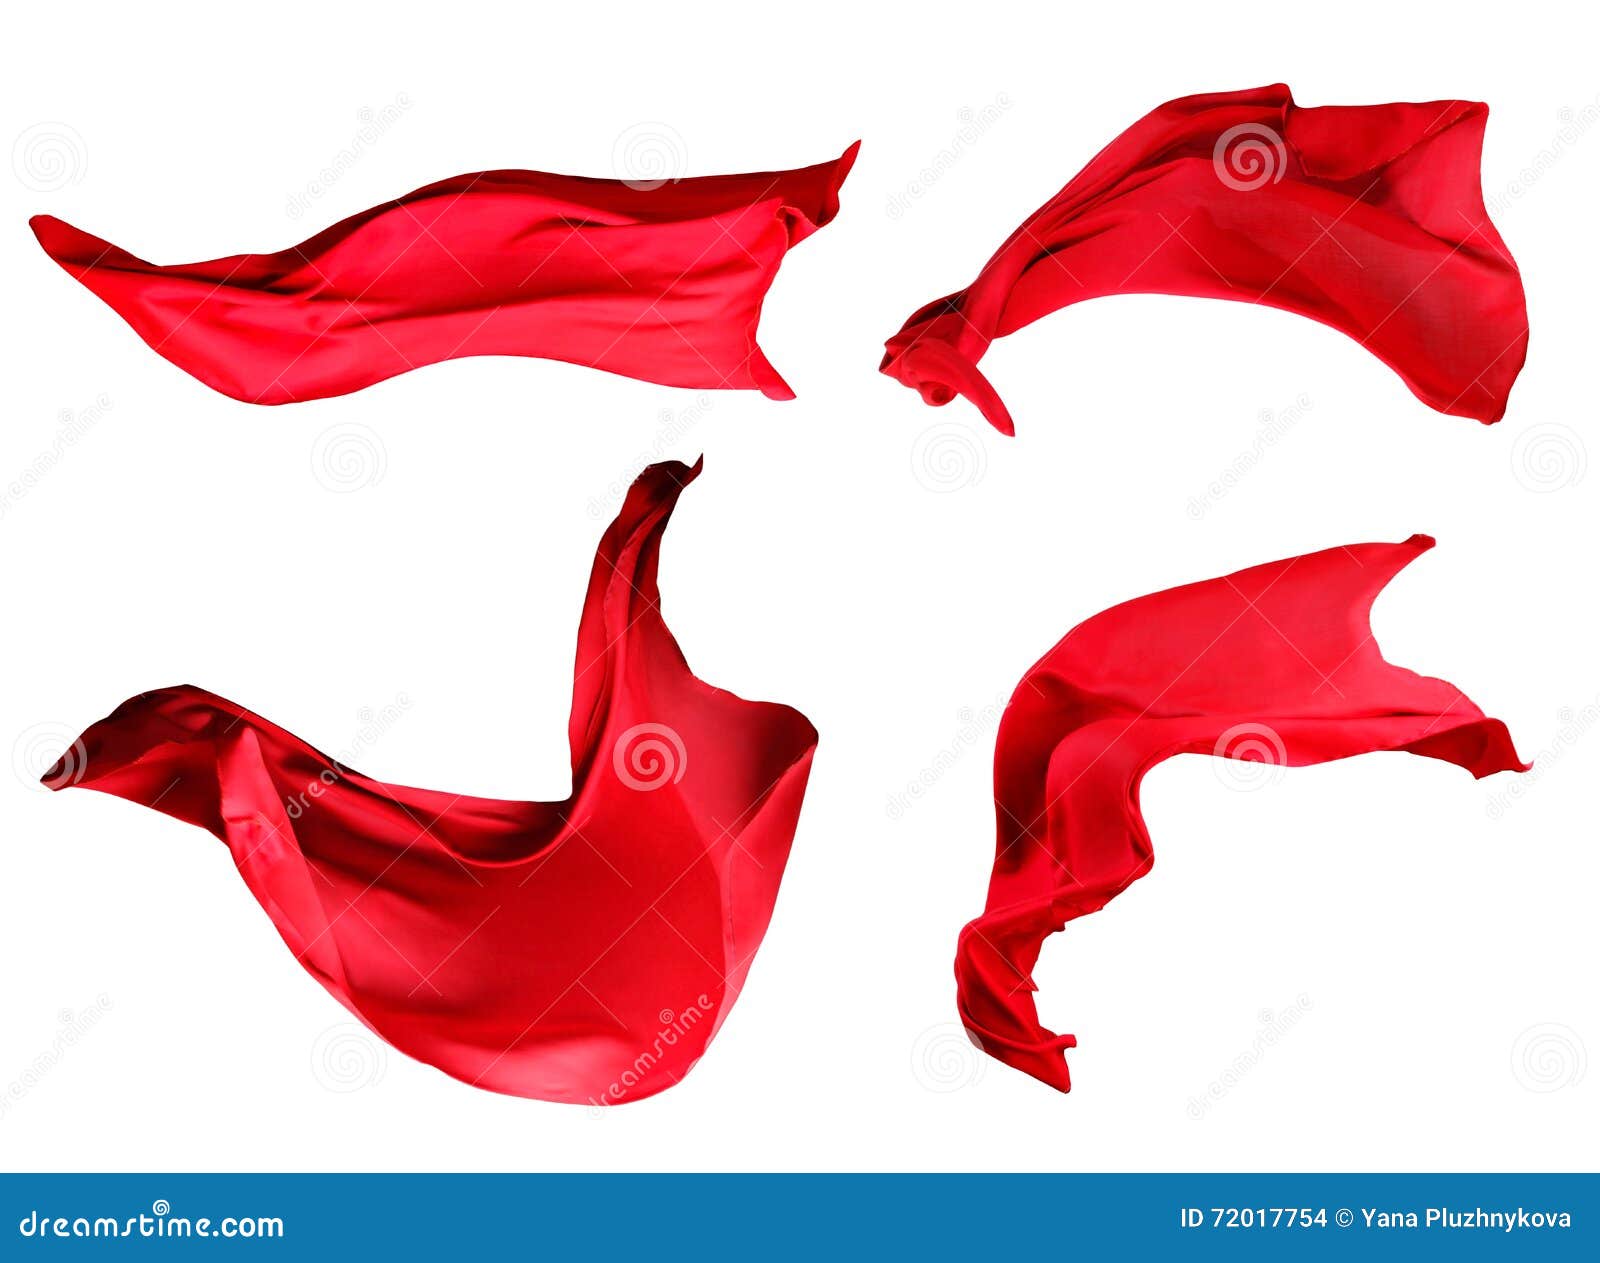 fabric cloth flowing on wind